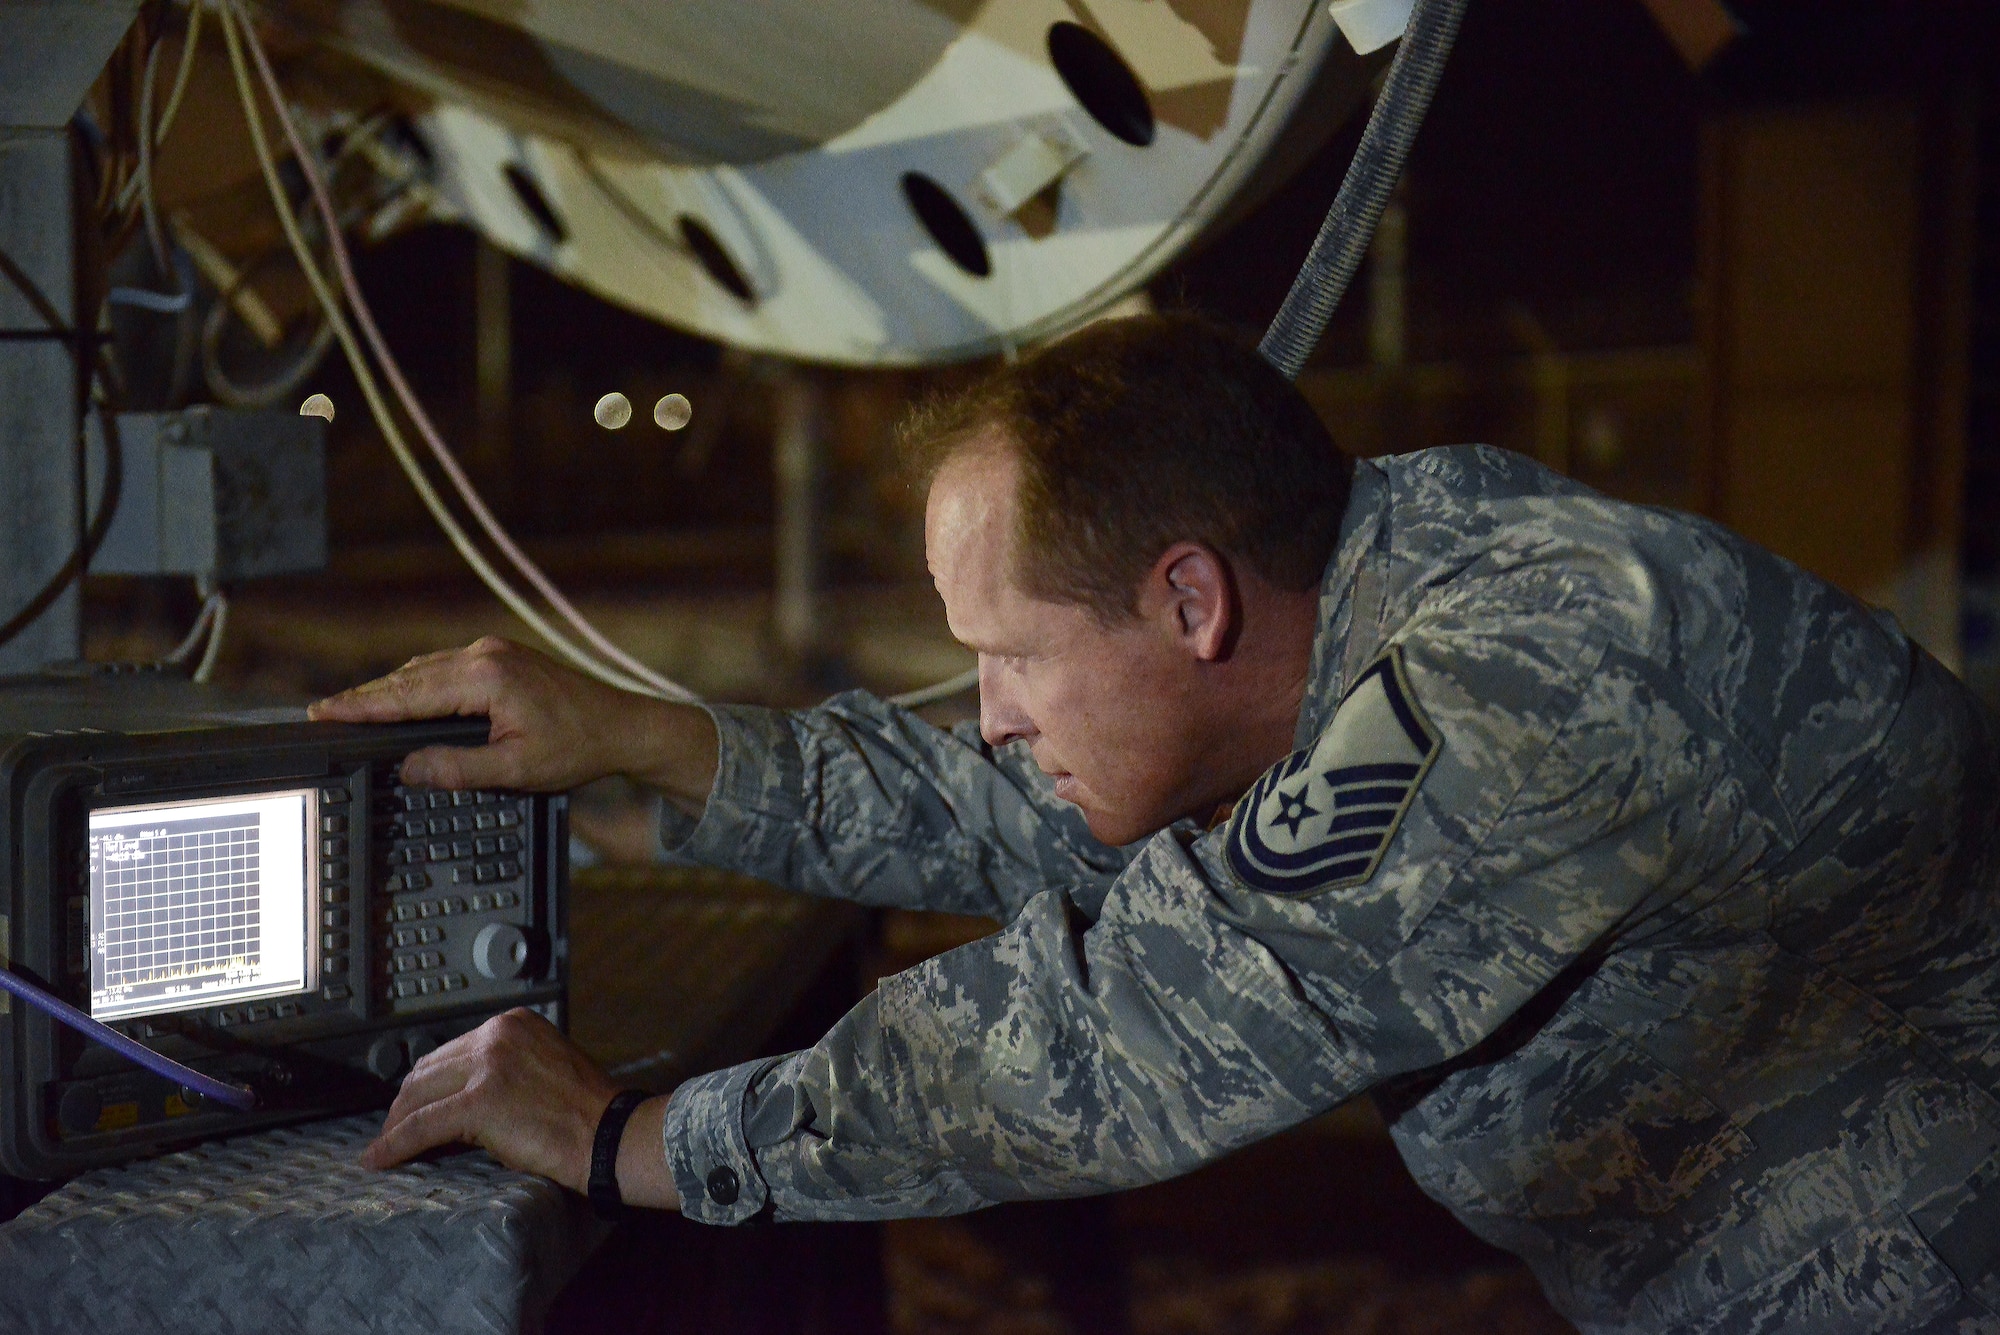 Master Sgt. Brian Popham, 379th Expeditionary Operations Support Squadron Silent Sentry, monitors and adjusts signal strength from an antenna during routine maintenance checks signal May 27, 2015 at Al Udeid Air Base, Qatar. The Silent Sentry team monitors high priority satellite communication signals, detects electromagnetic interference on those signals and geolocates the source of that interference along with other signals of interest. (U.S. Air Force photo/Staff Sgt. Alexandre Montes)